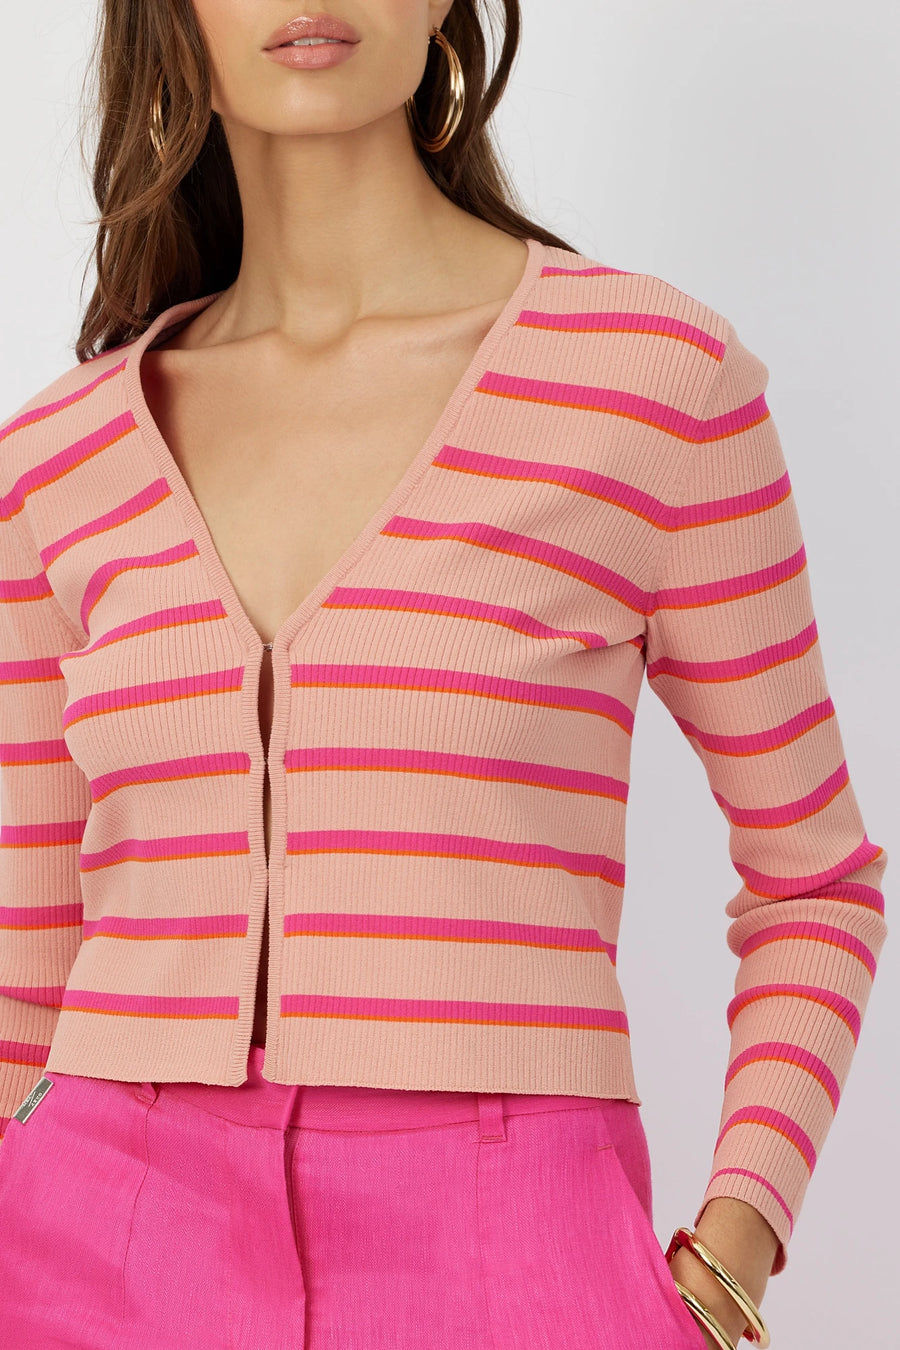 The Gemma ribbed knit cardigan in bayadere stripe by Greyven